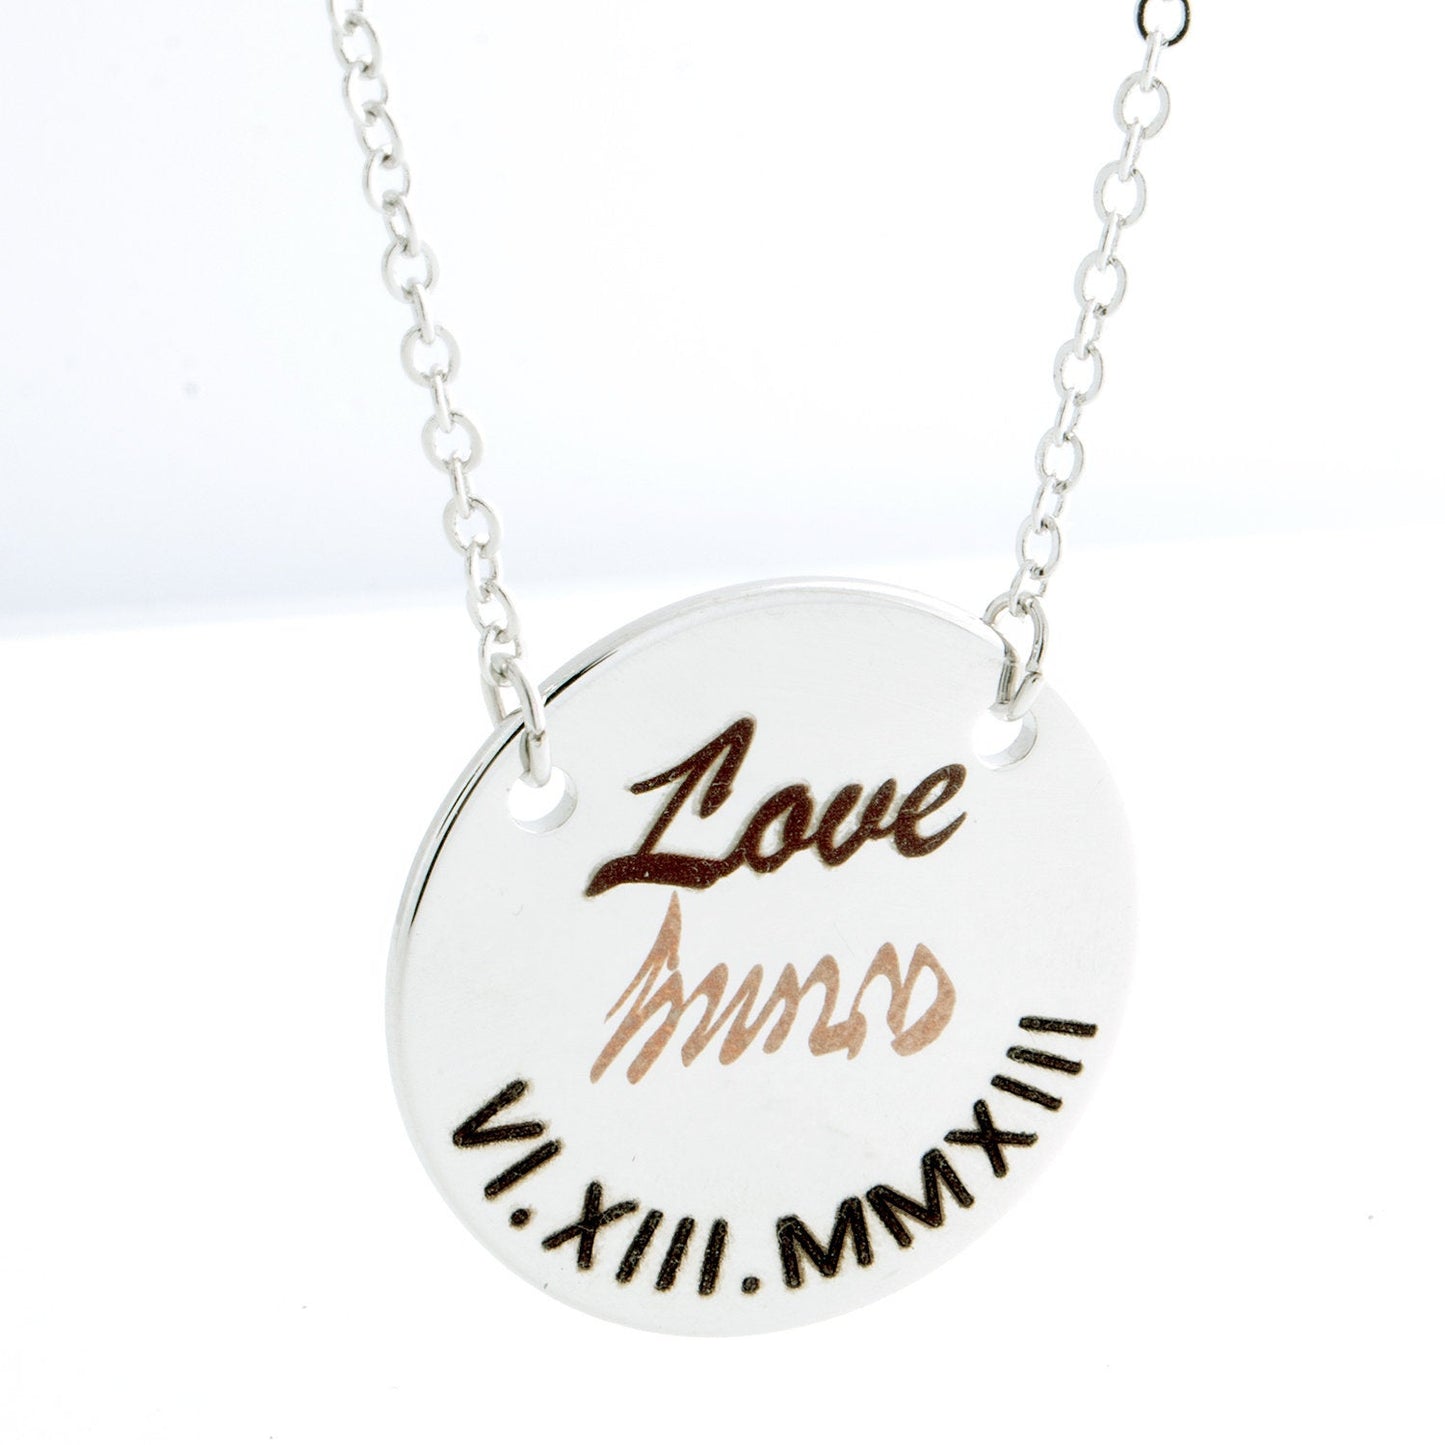 Buy BTS Love=Army Fan Necklace at Petite Boutique